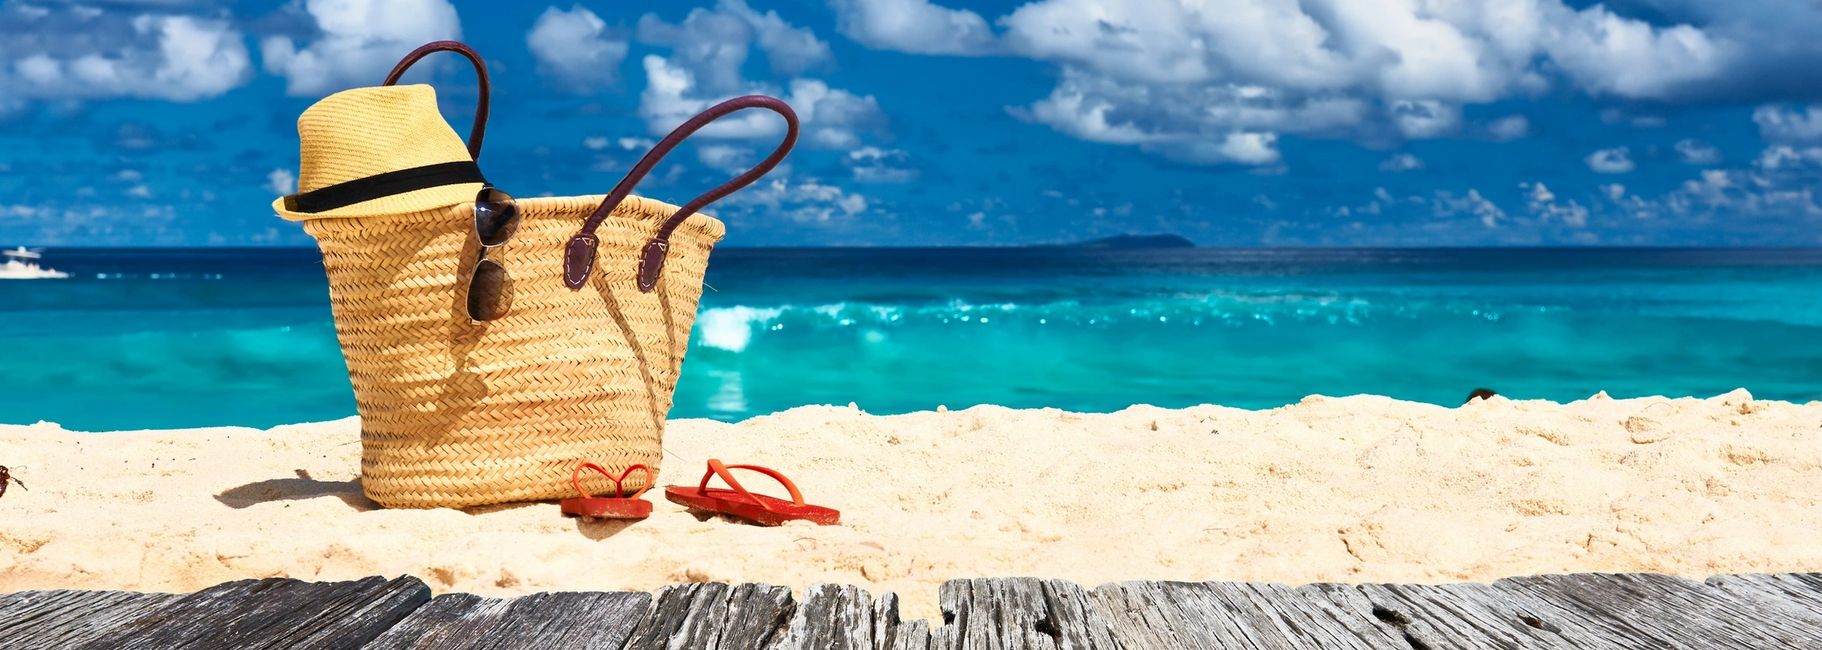 beach bag with straw hat on beach with tropical waters behind